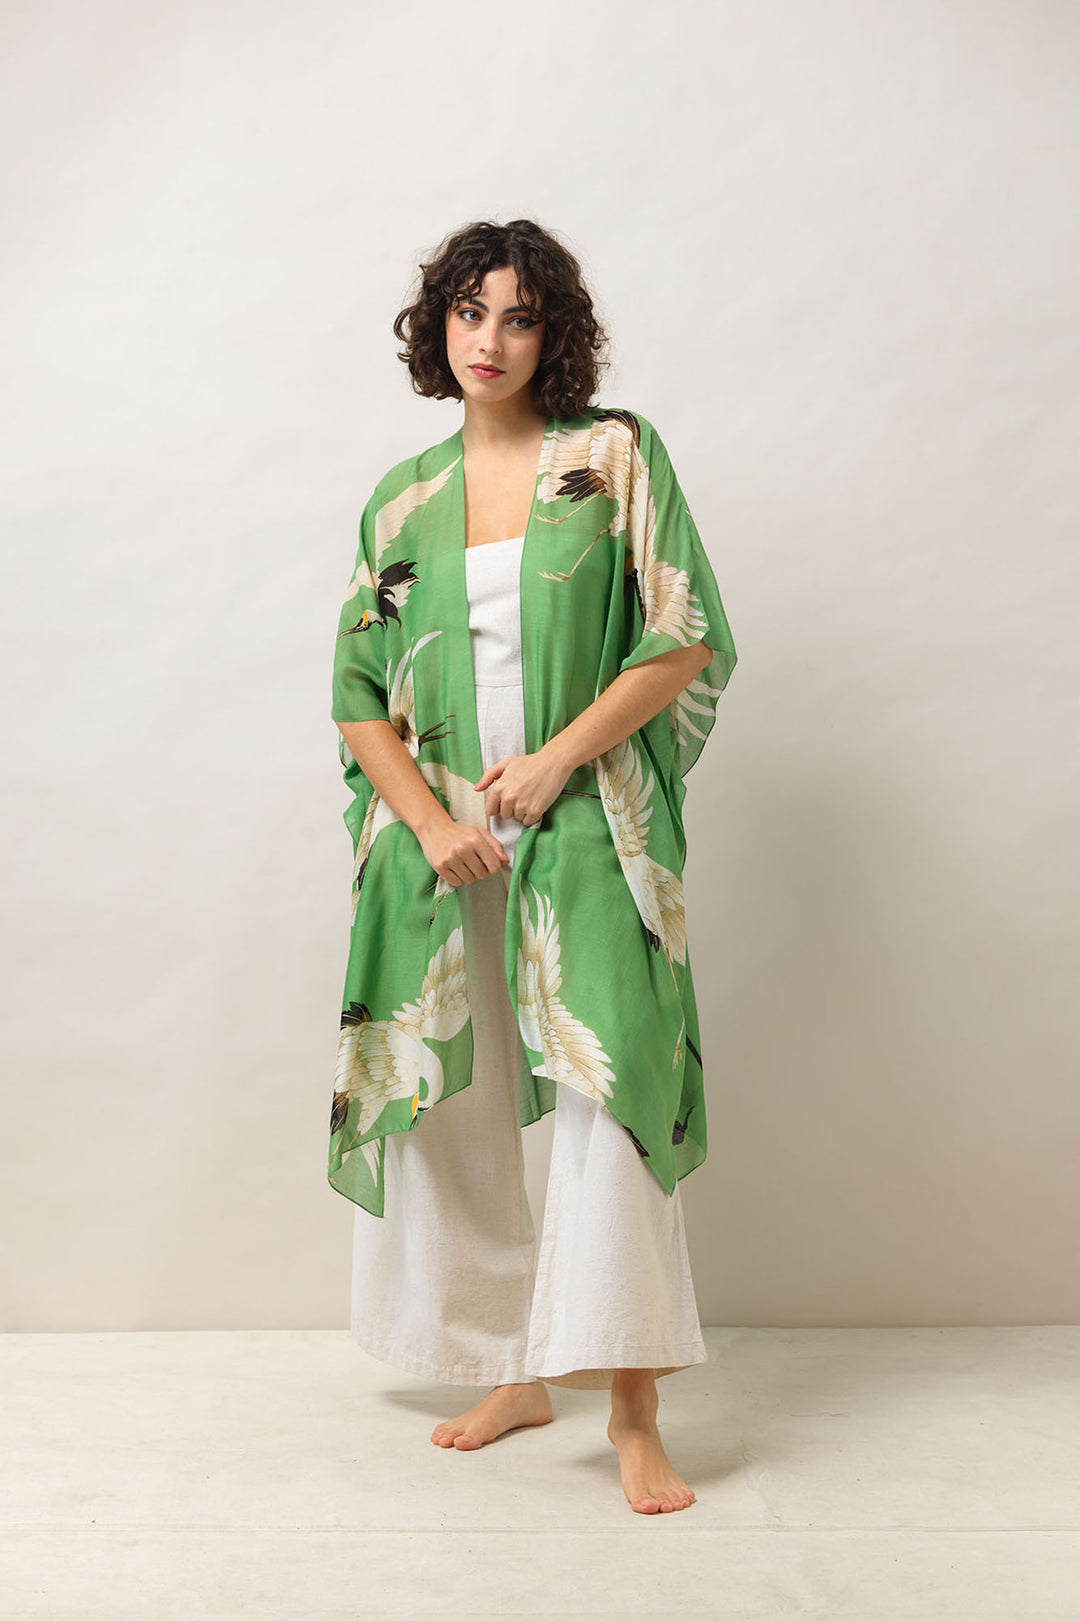 Women's lightweight throwover shawl in pea green and white stork print by One Hundred Stars